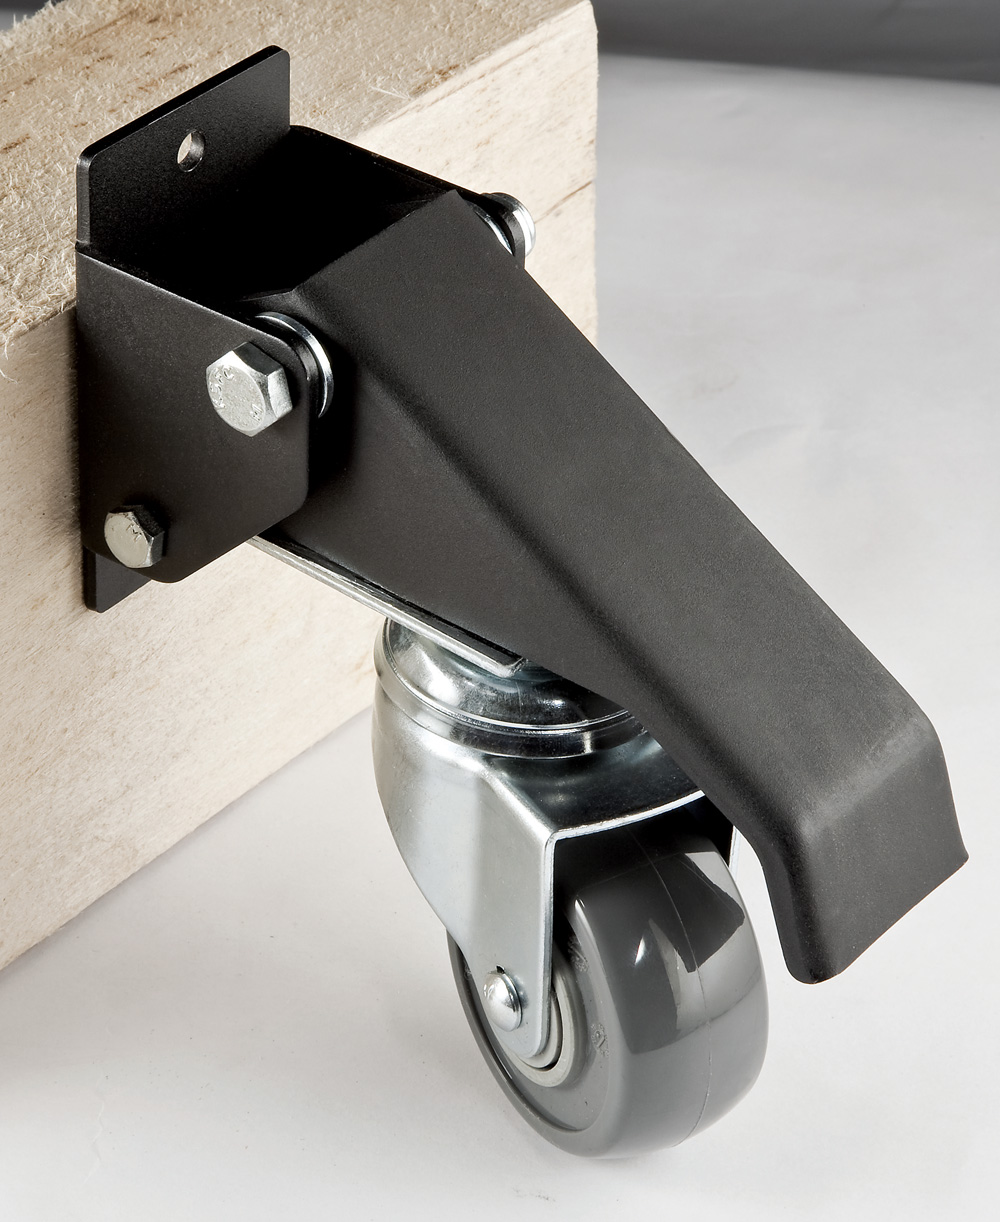 Rockler Caster Kit With One-touch Lift Mechanism Mobilizes